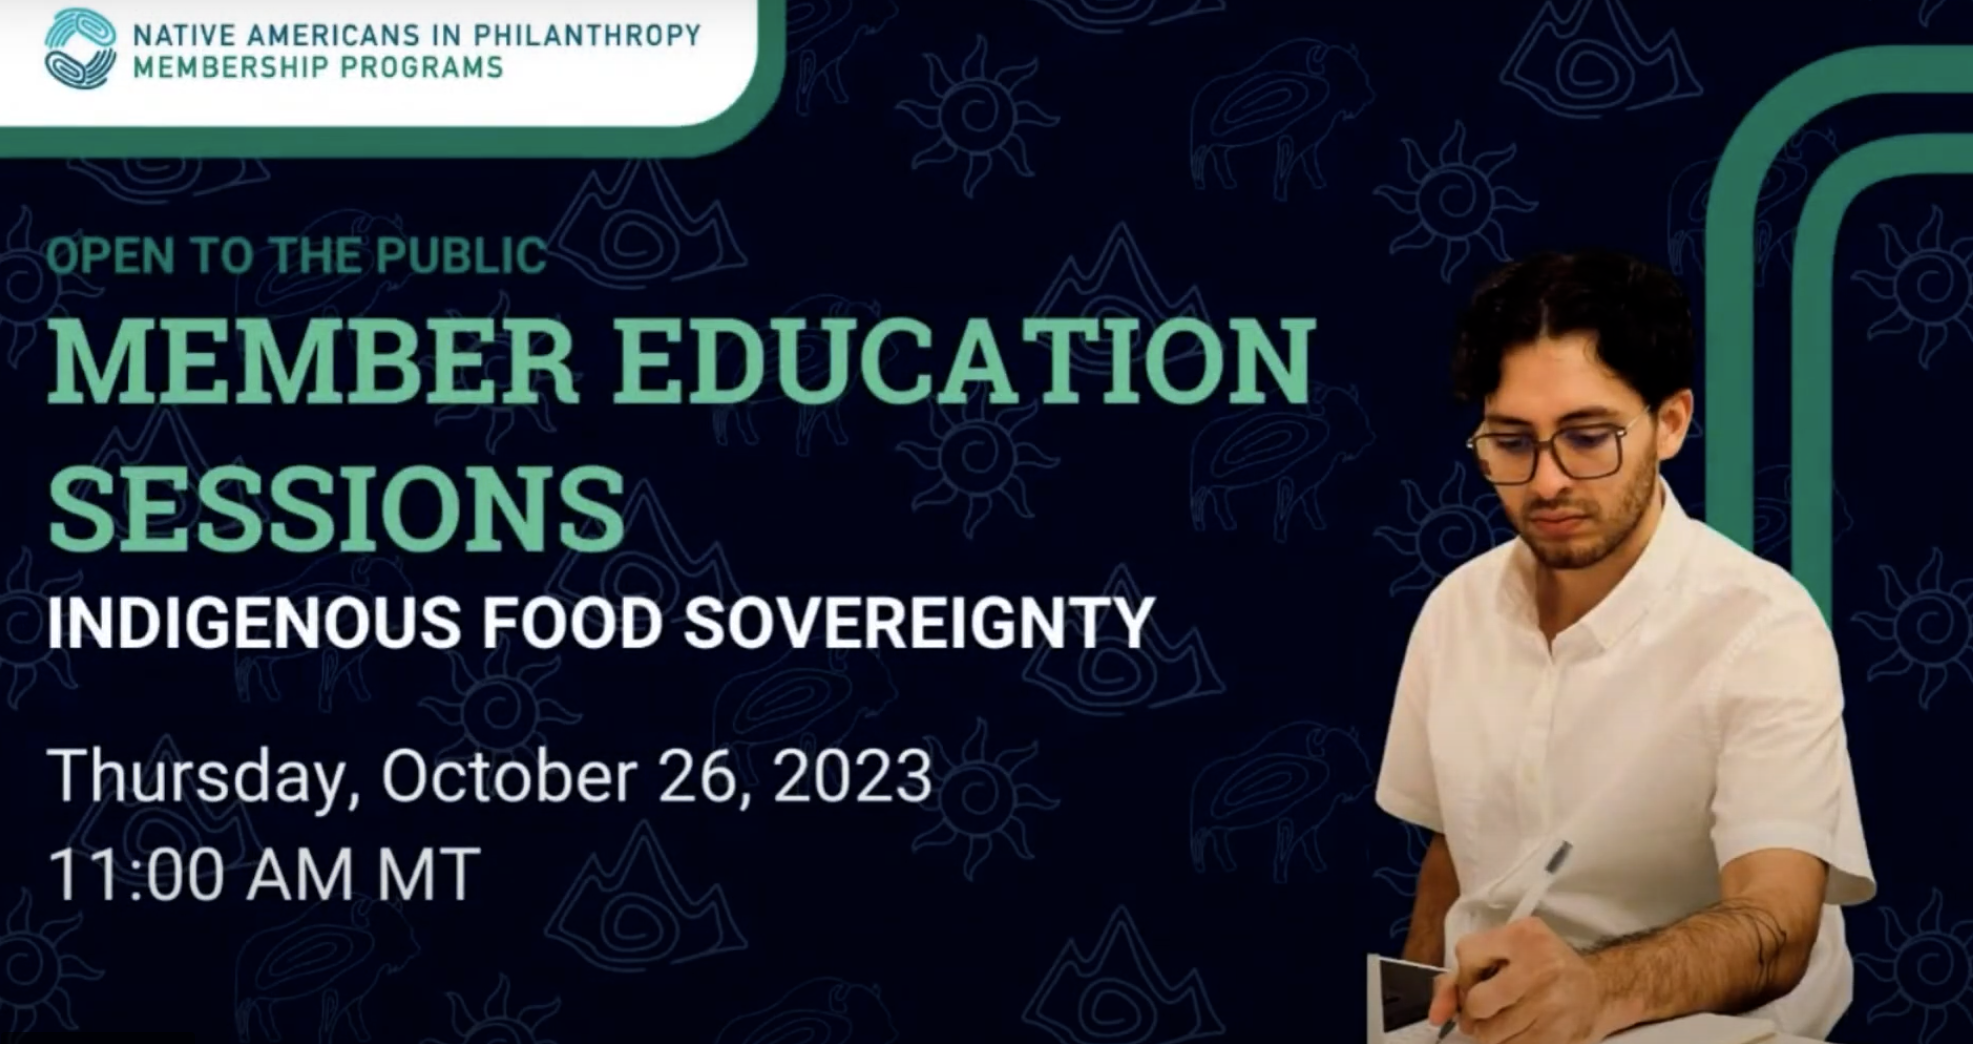 Member Education Sessions: Indigenous Food Sovereignty thumbnail